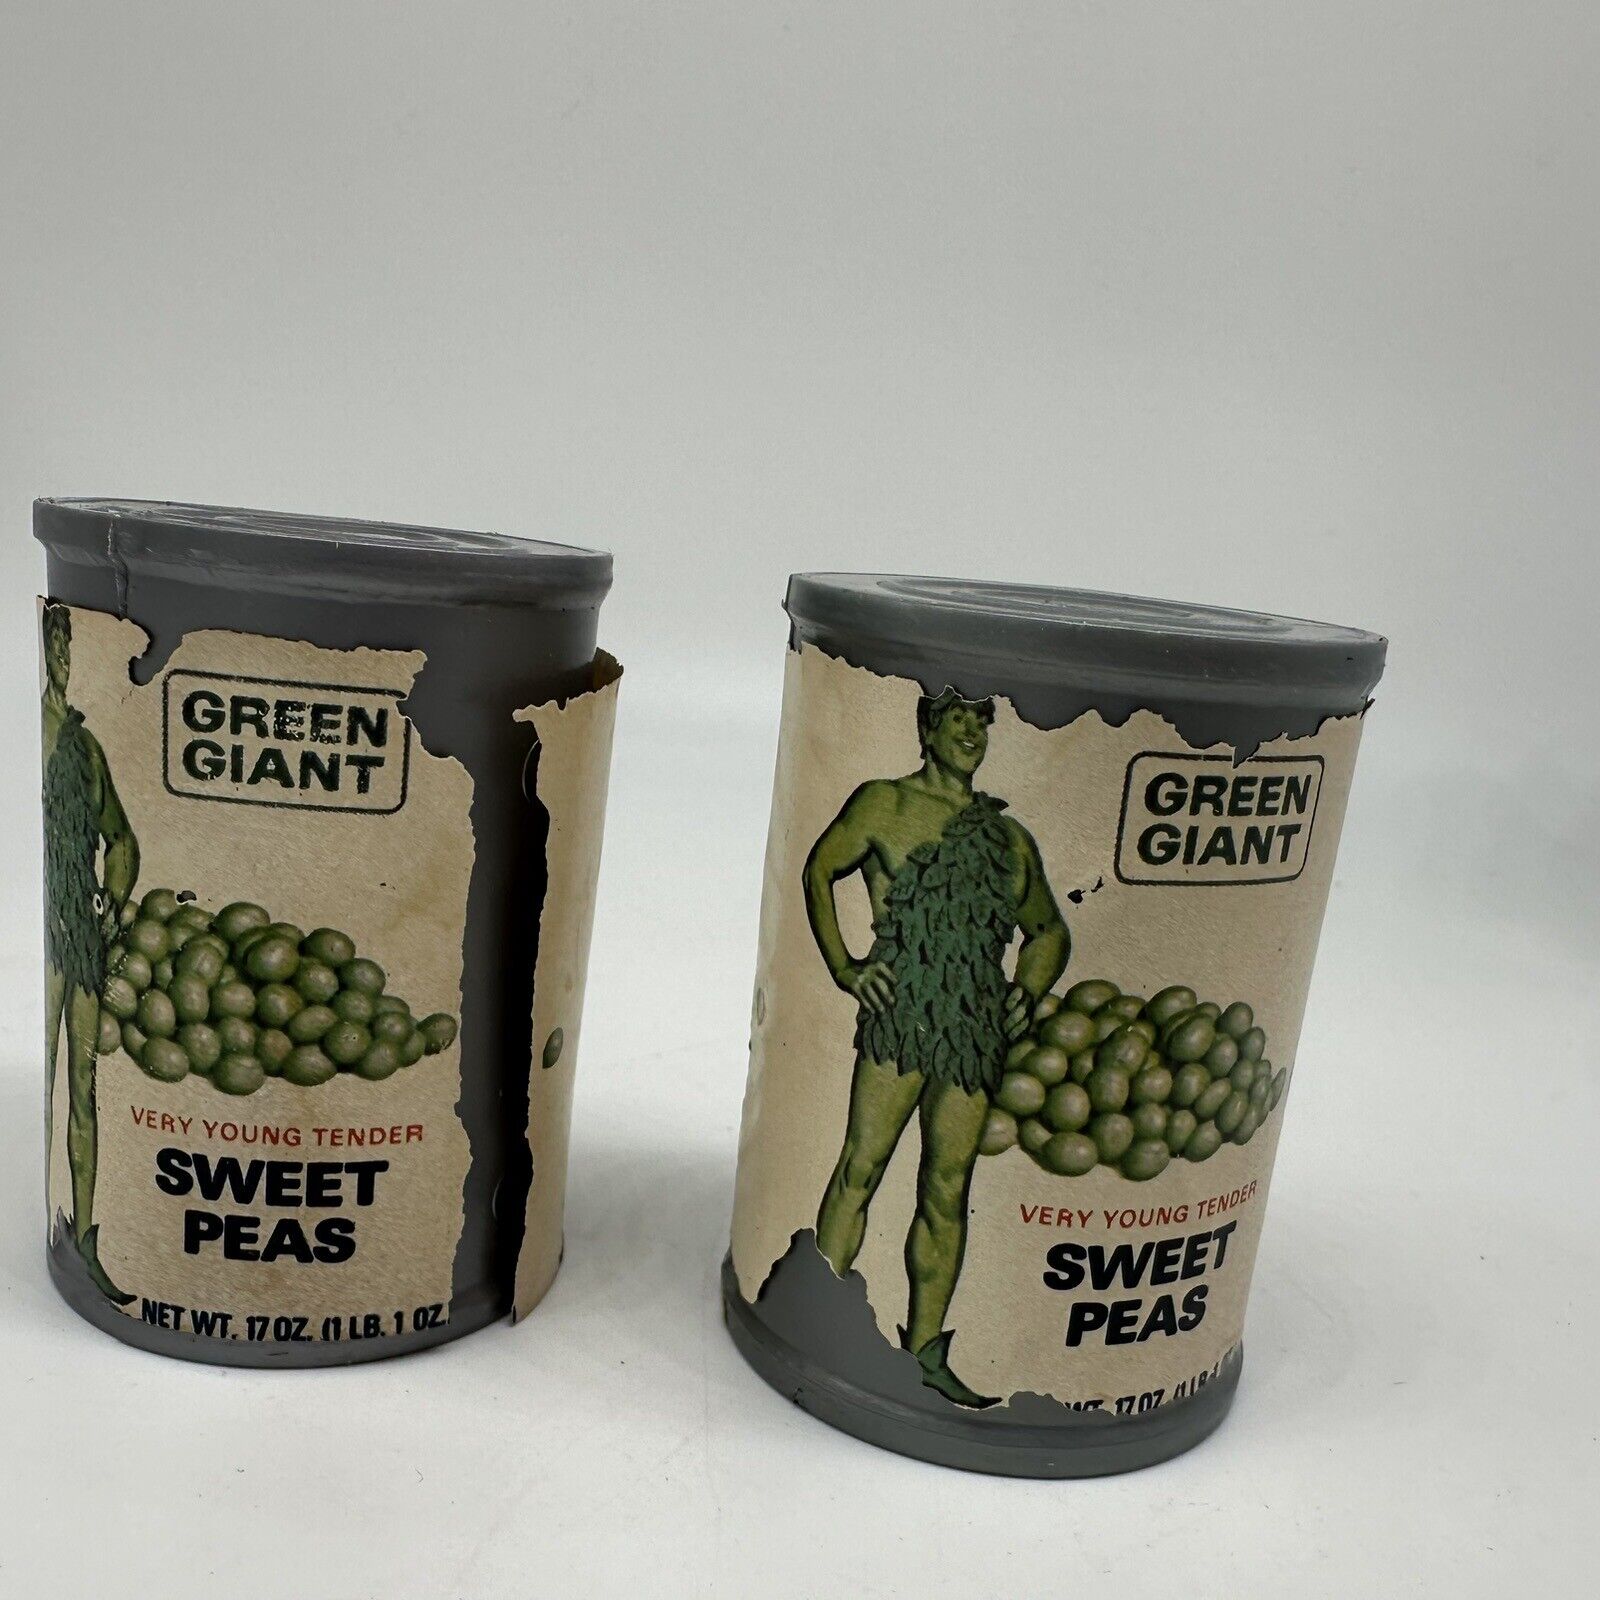 TWO Vintage Green Giant Sweet Peas Cans Plastic Play Food Empty Faux Mini 1970s